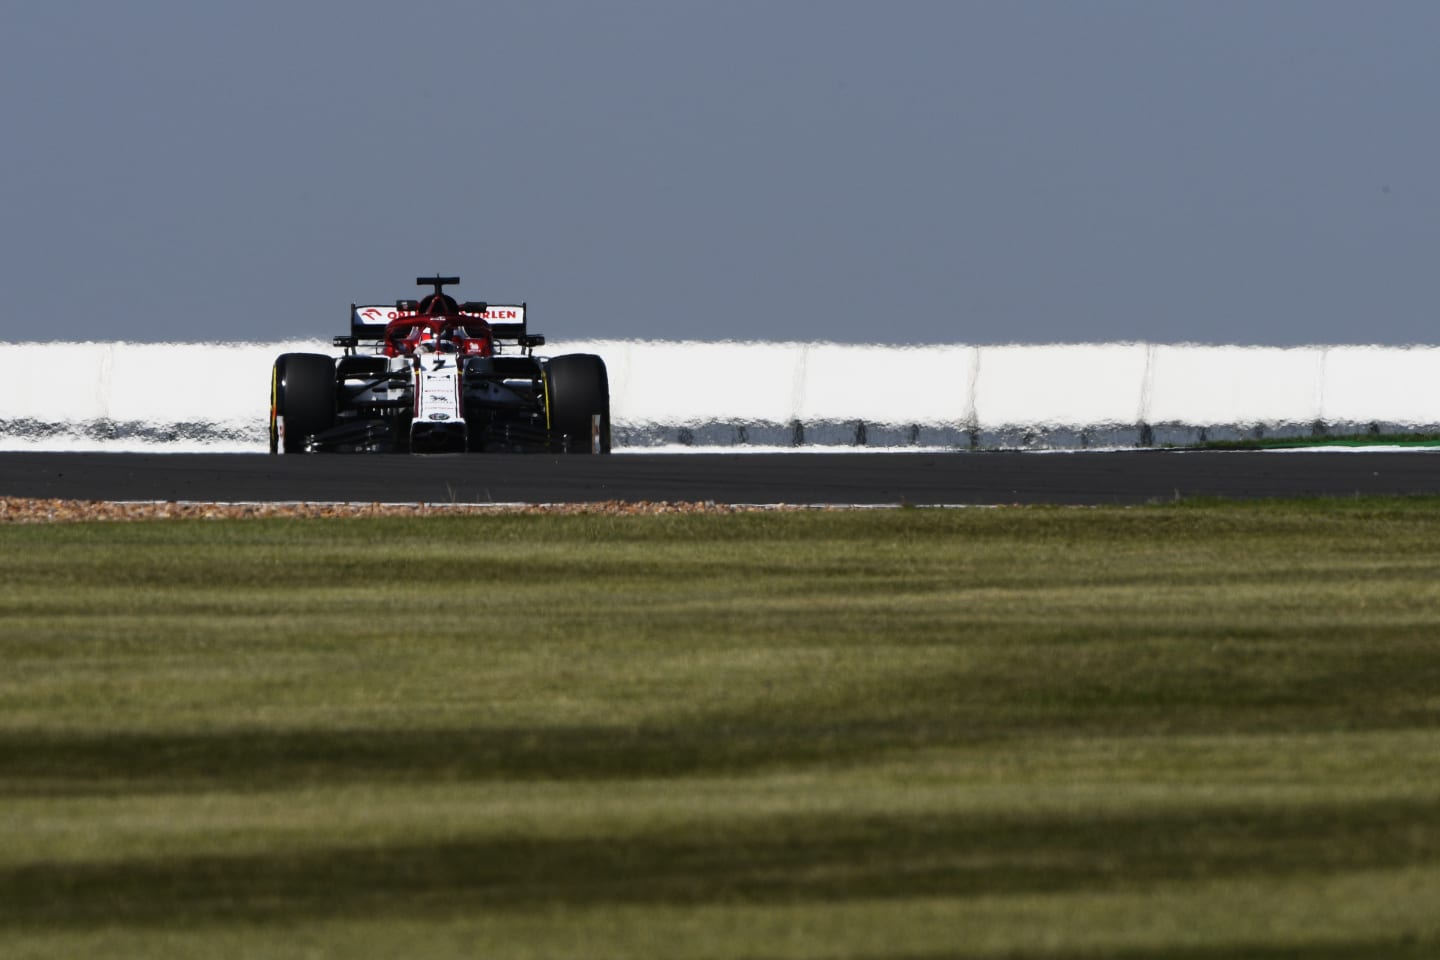 NORTHAMPTON, ENGLAND - JULY 31: Kimi Raikkonen of Finland driving the (7) Alfa Romeo Racing C39 Ferrari on track during practice for the F1 Grand Prix of Great Britain at Silverstone on July 31, 2020 in Northampton, England. (Photo by Rudy Carezzevoli/Getty Images)